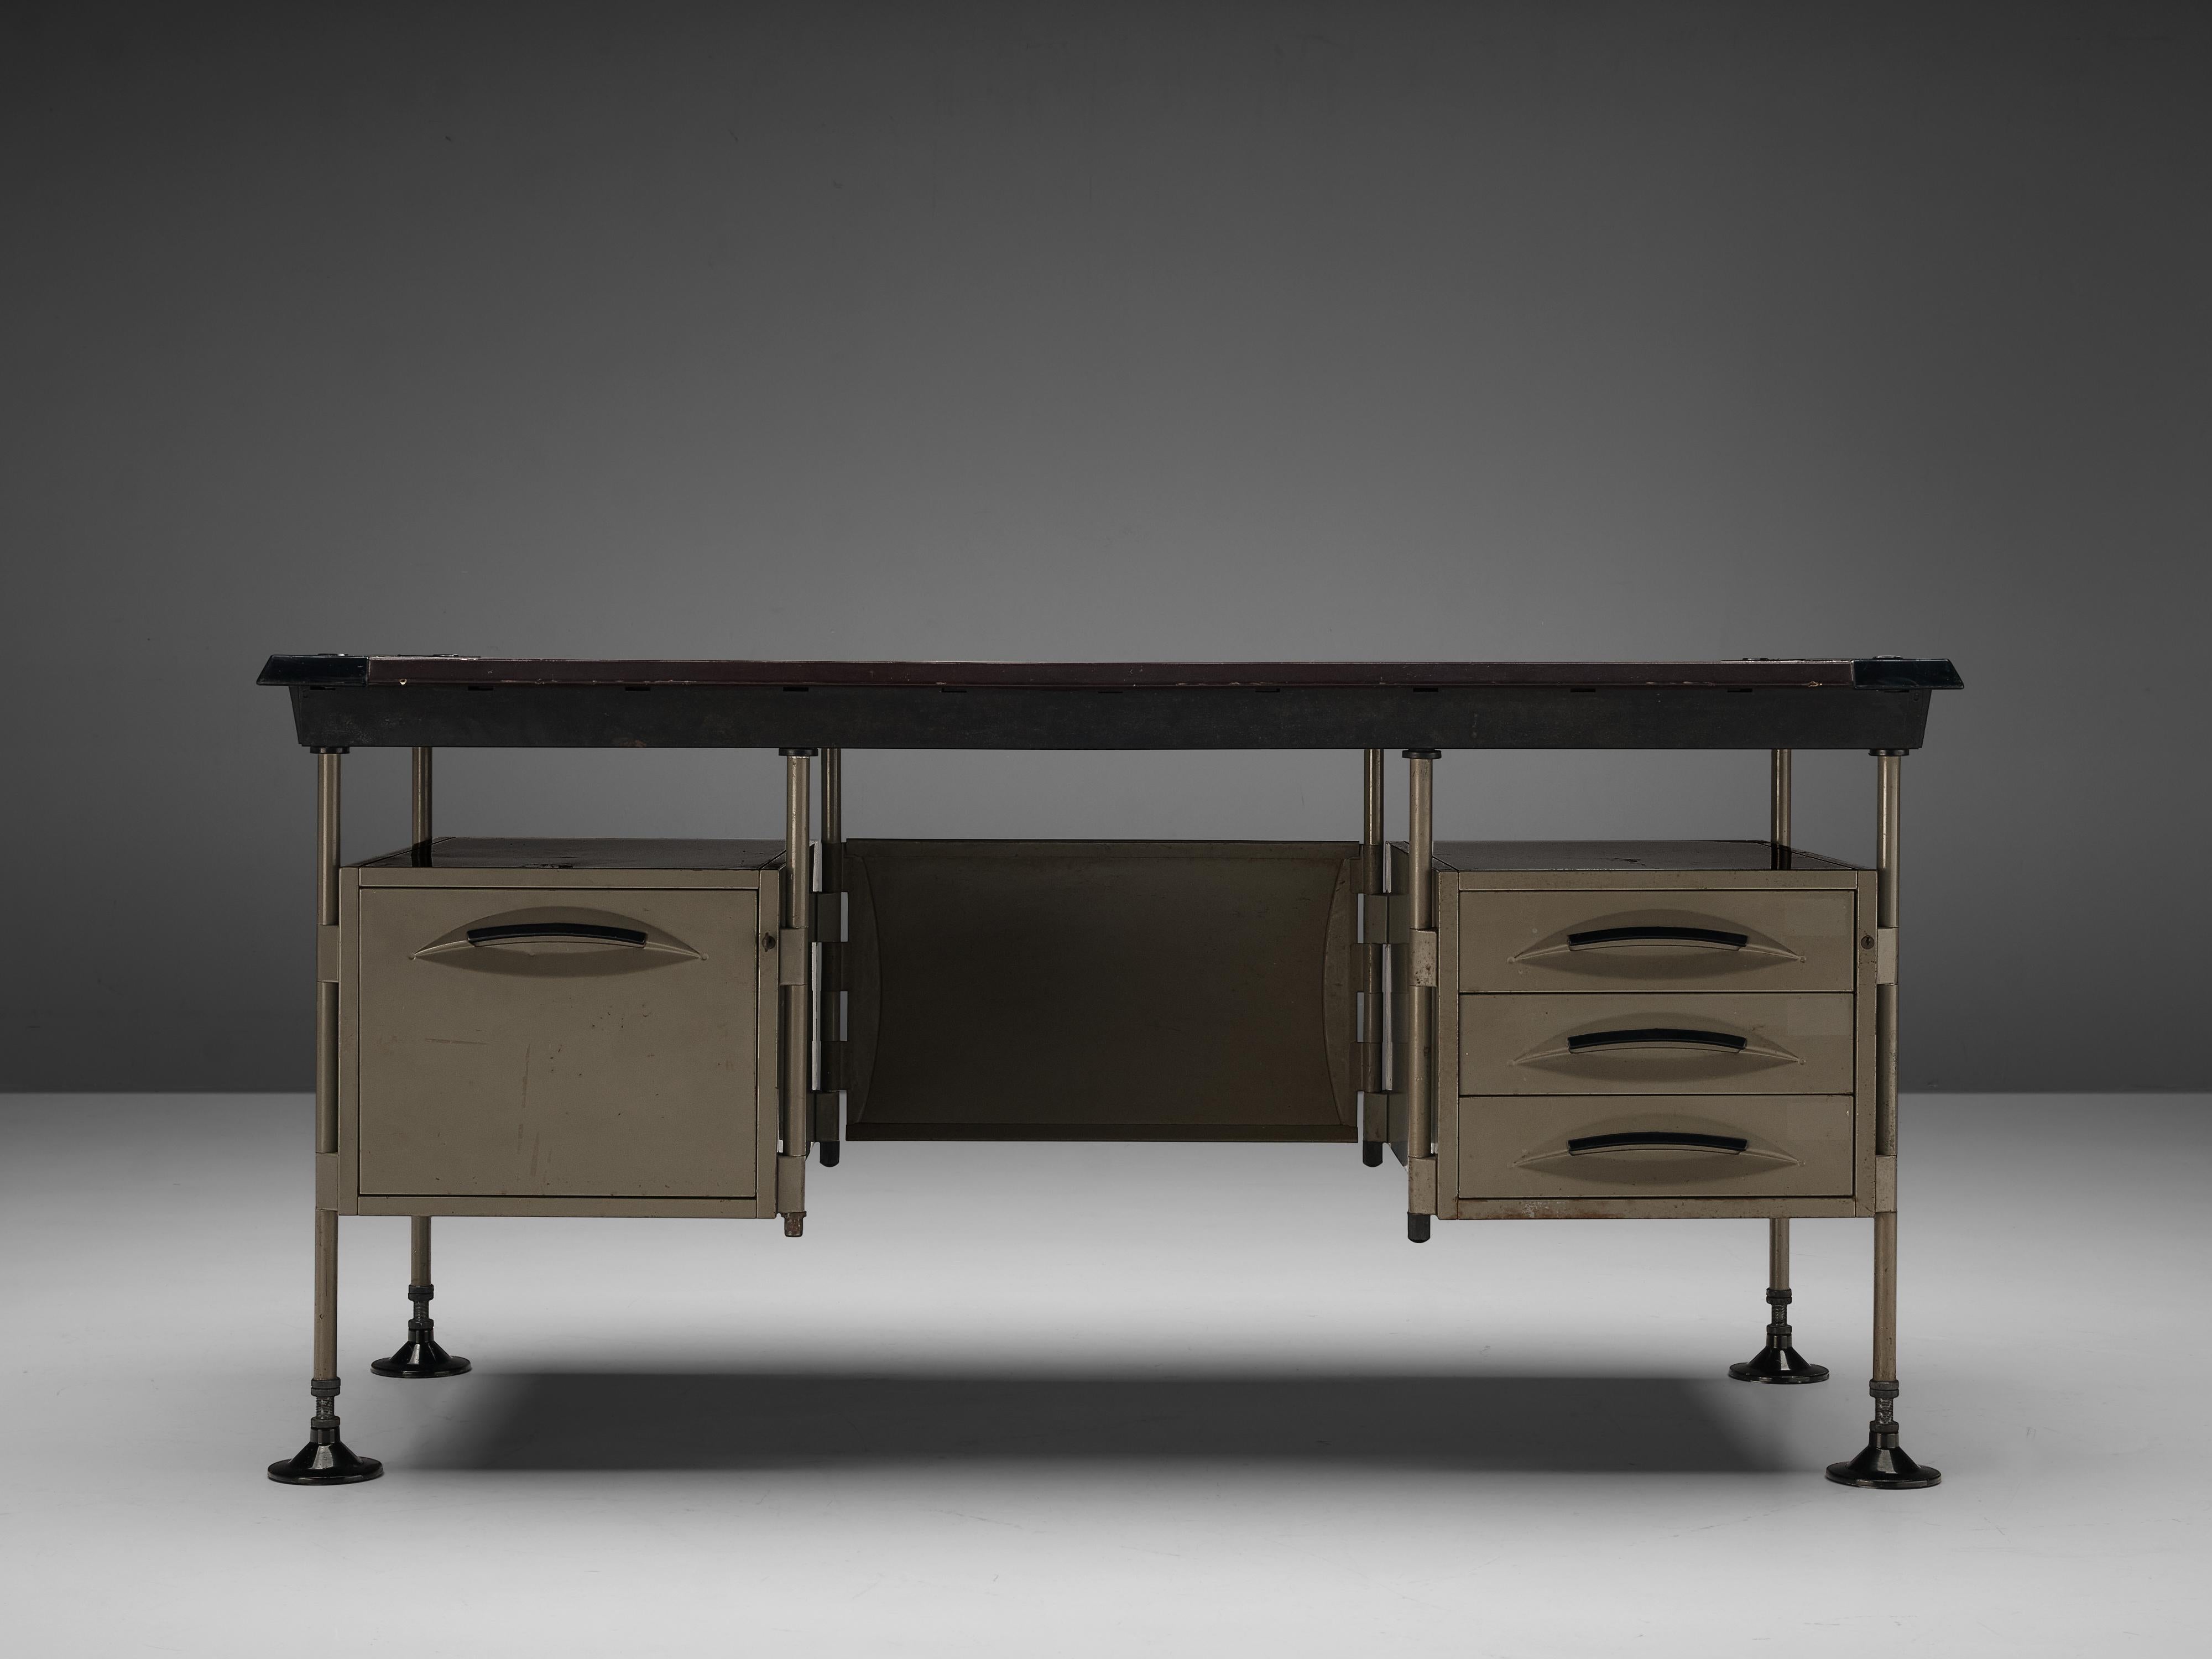 Studio BBPR for Olivetti, 'Spazio' desk with drawers, steel, vinyl, plastic, Italy, ca. 1960 

The desk features two compartments of drawers. A purple vinyl tabletop combines wonderfully with the metal base in soft green/grey colored metal. The legs